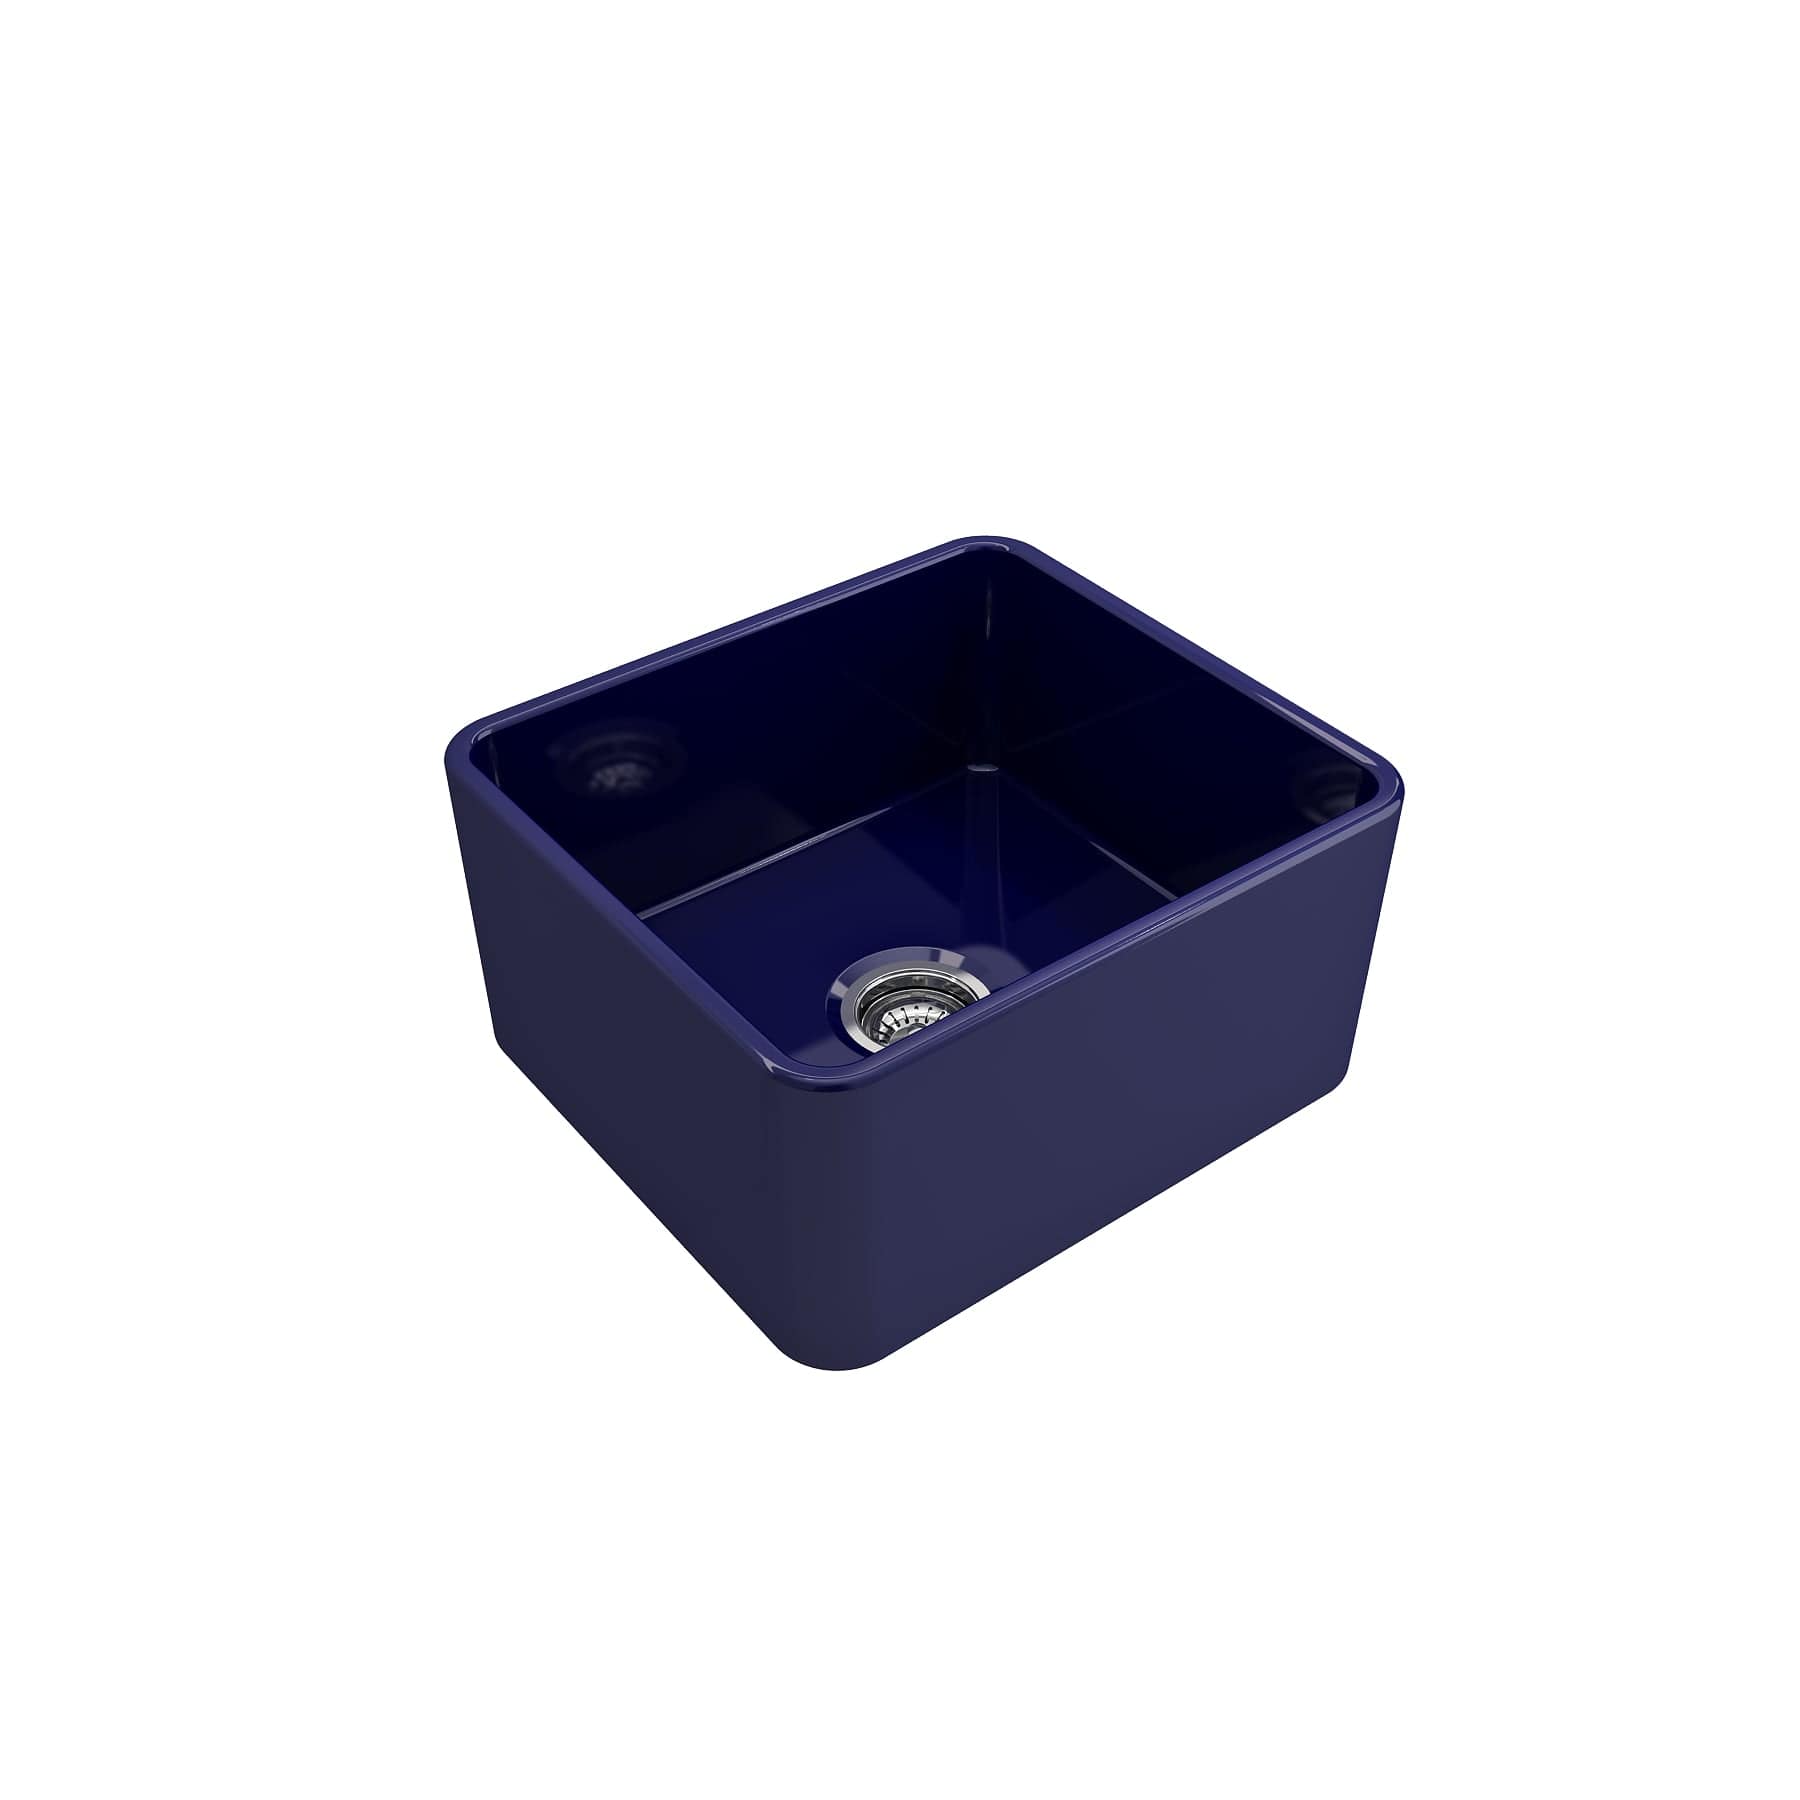 BOCCHI CLASSICO 20" Fireclay Farmhouse Single Bowl Kitchen Sink with Protective Bottom Grid and Strainer, SAPPHIRE BLUE - 1136-010-0120 - Manor House Sinks